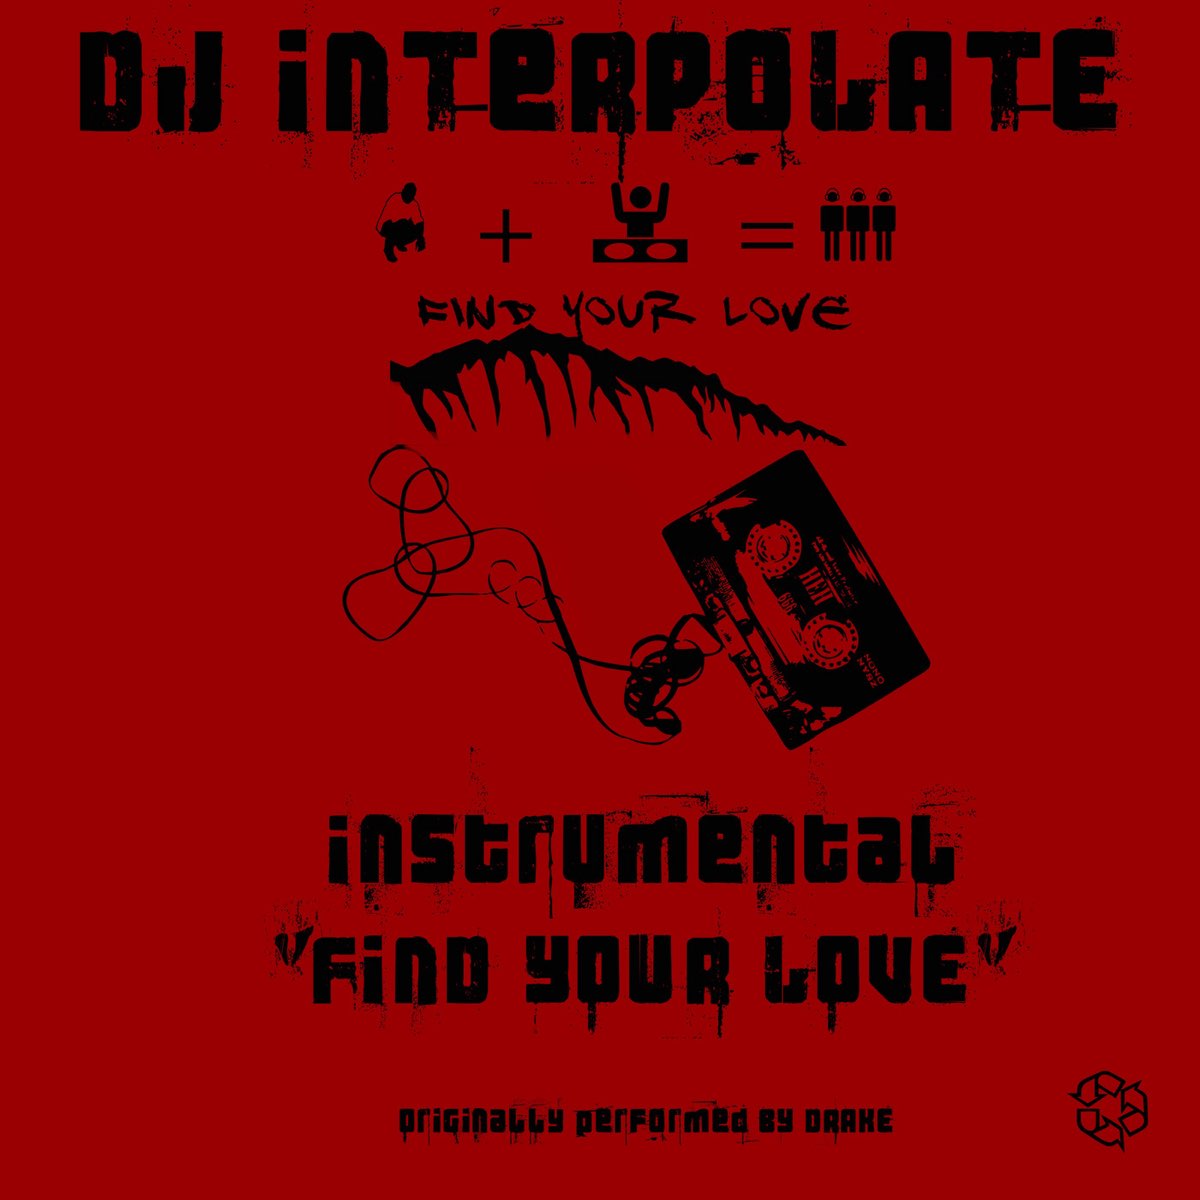 Find Your Love (Instrumental) [Originally Performed By Drake] - Single by  DJ Interpolate on Apple Music